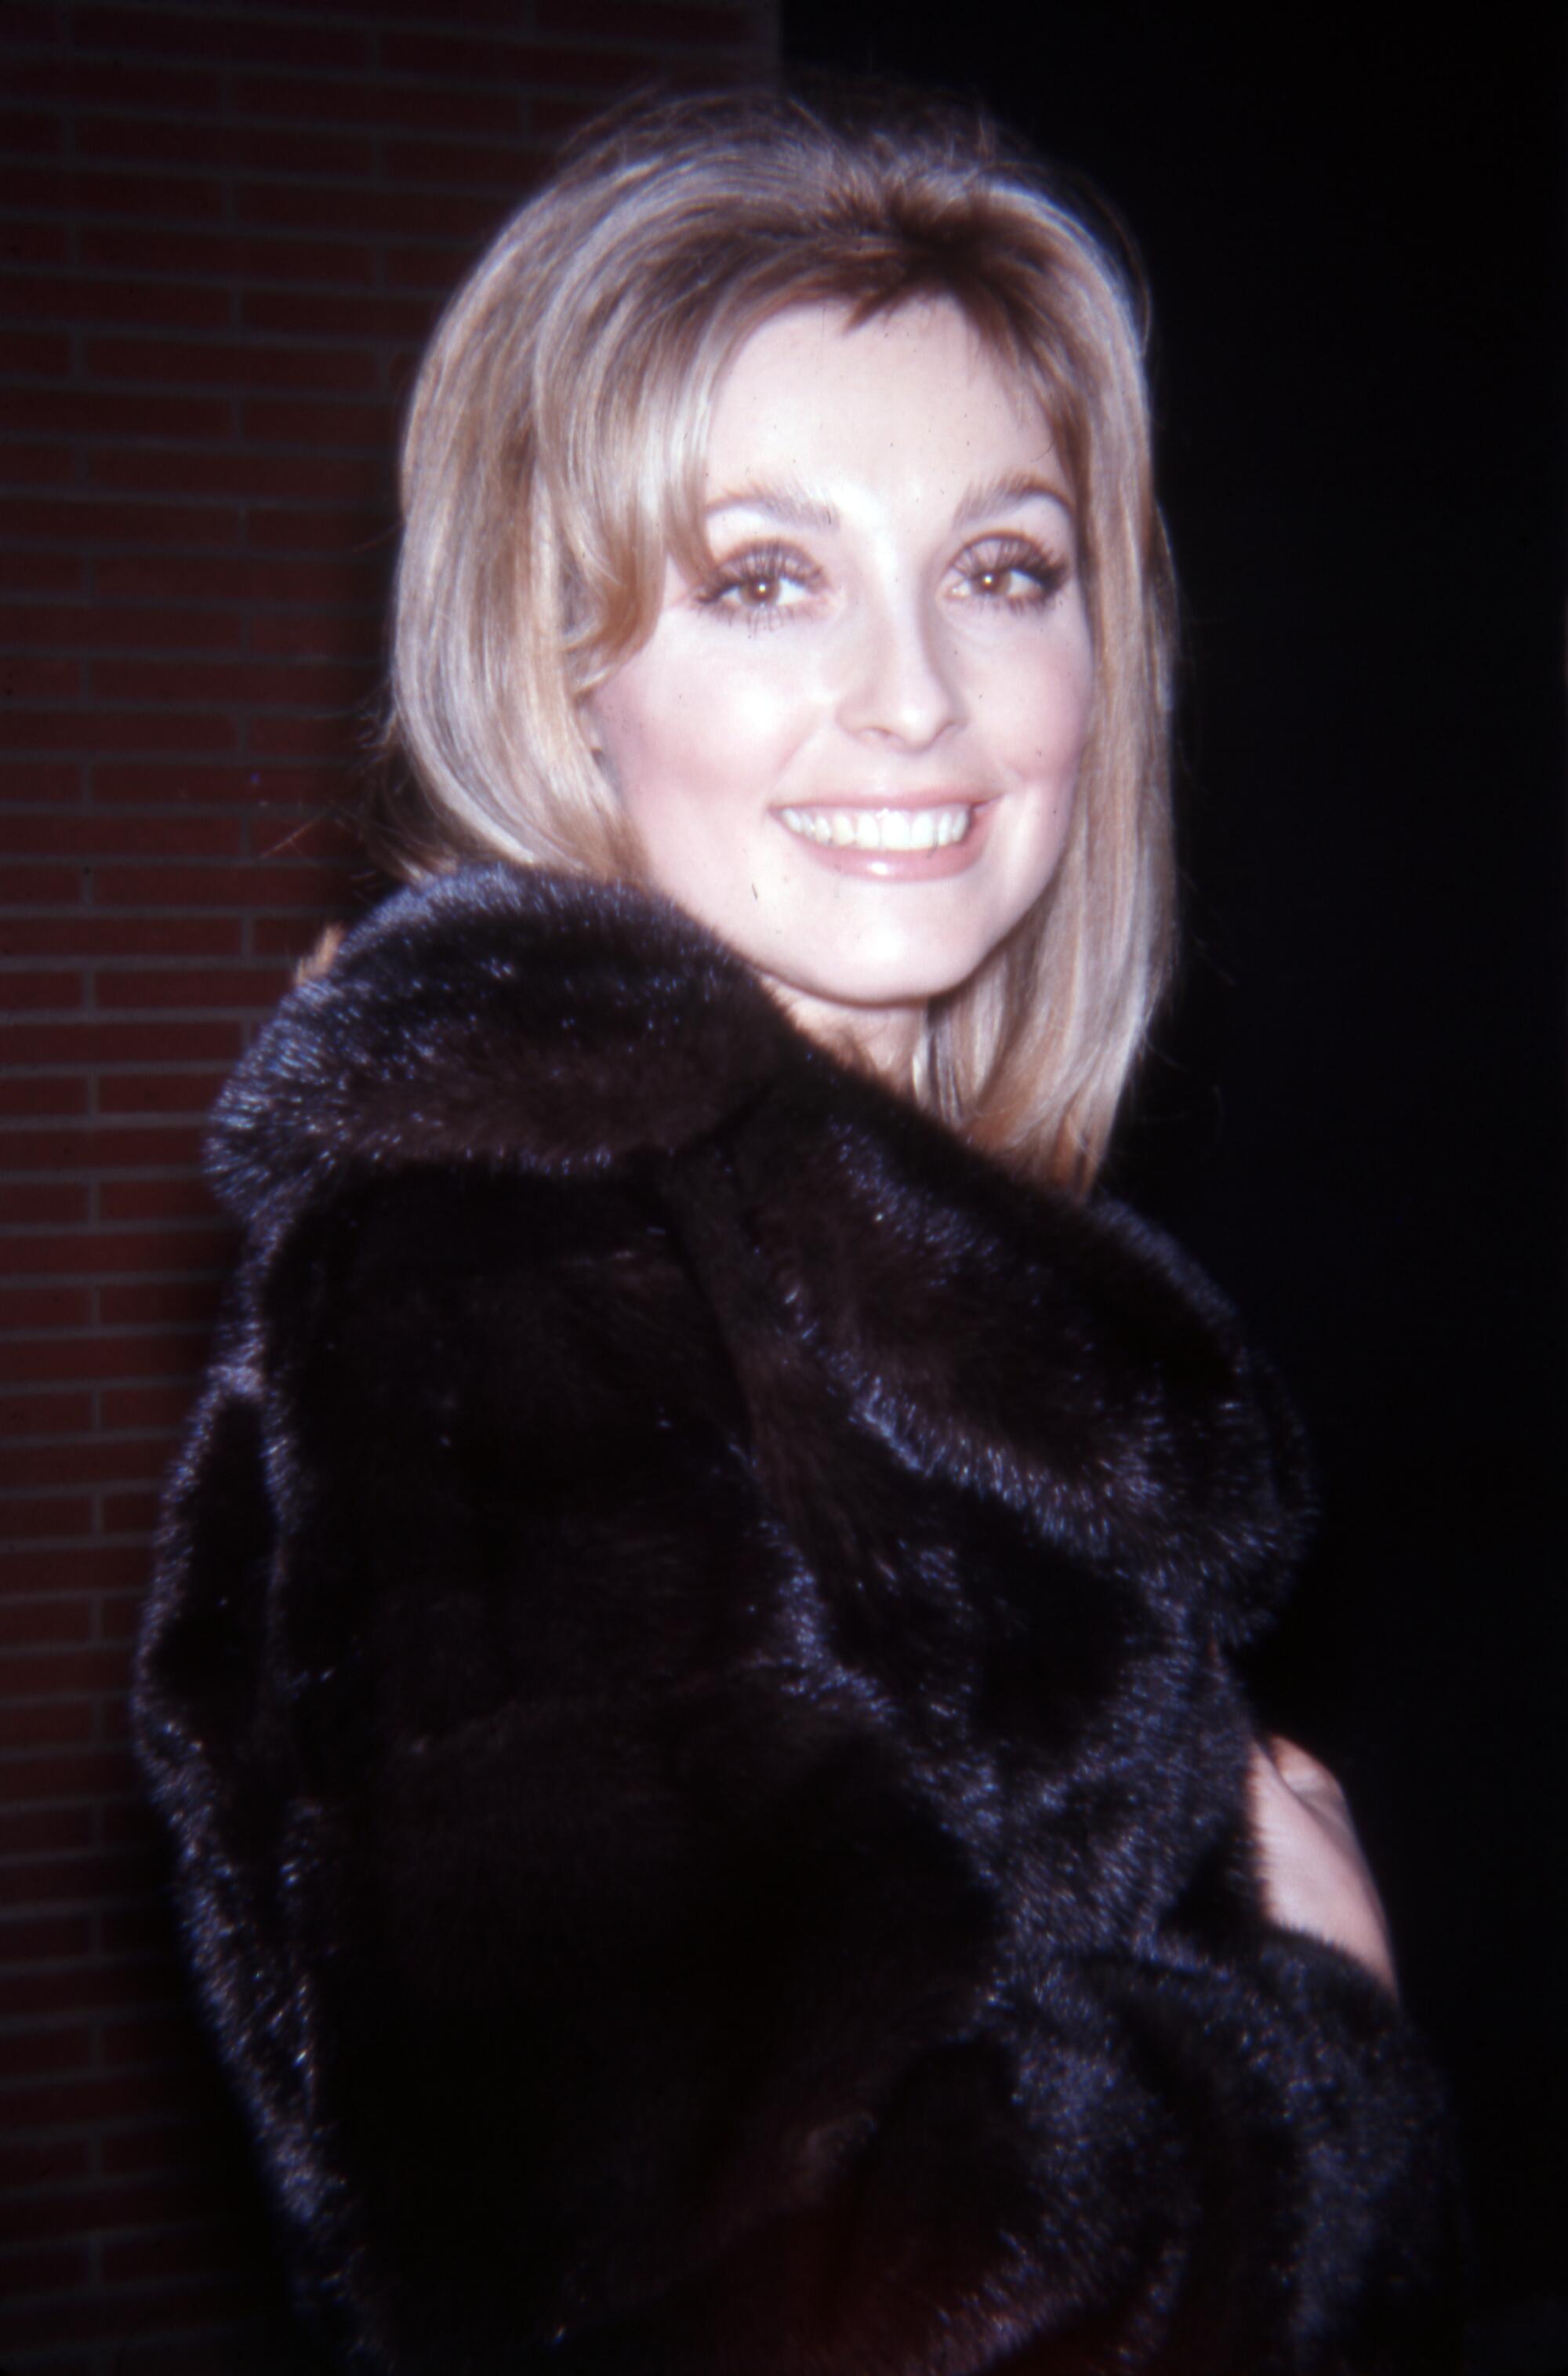 A woman with light brown hair in a dark fur coat smiles toward the camera.